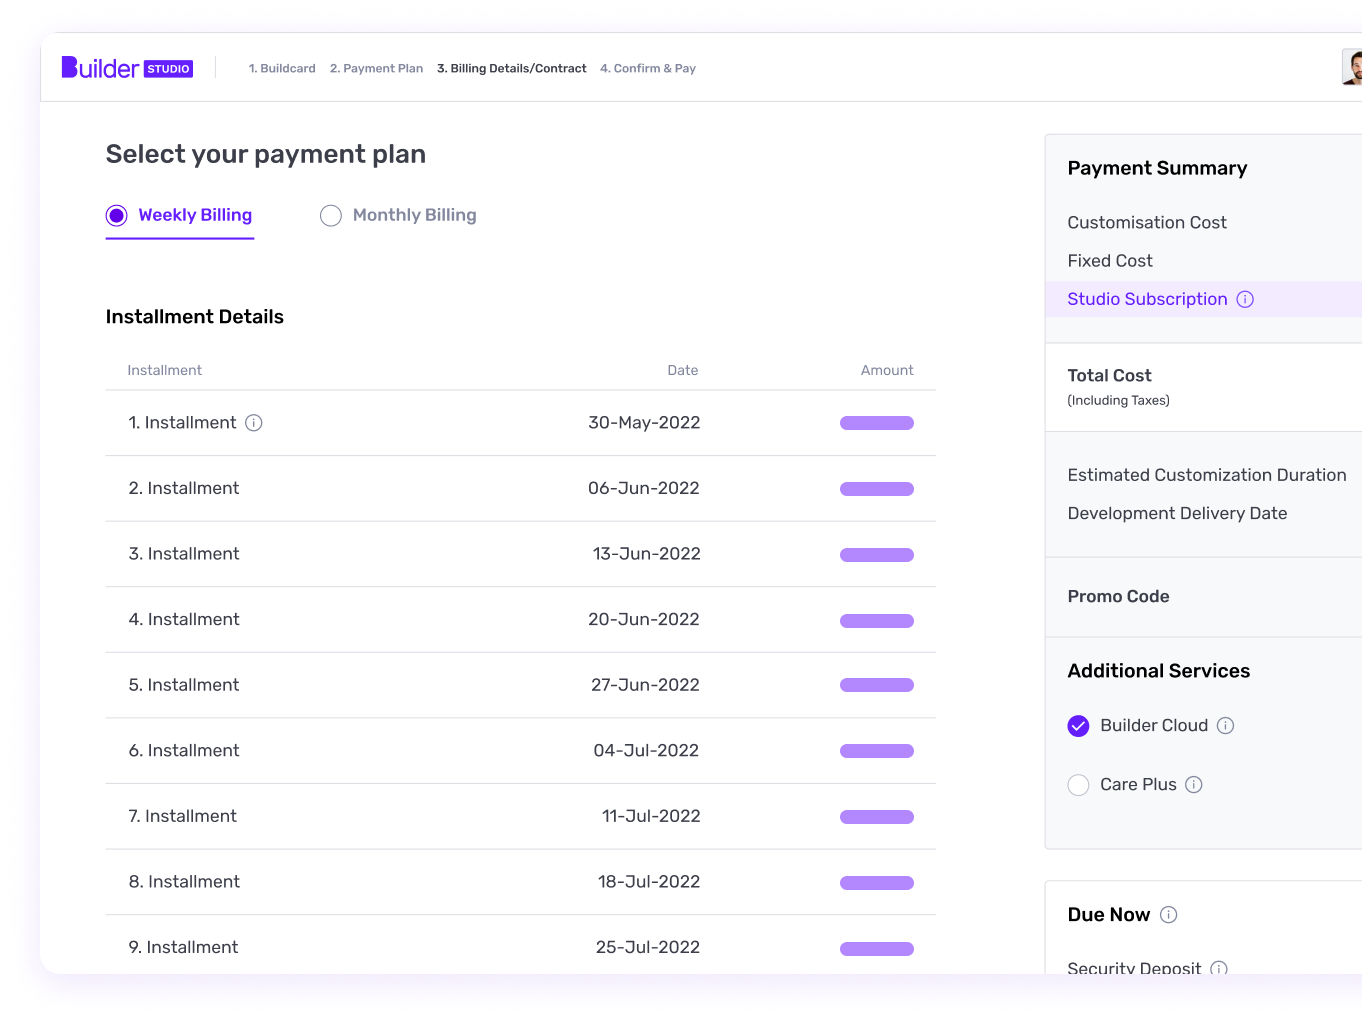 Builder Studio dashboard to select your payment plan